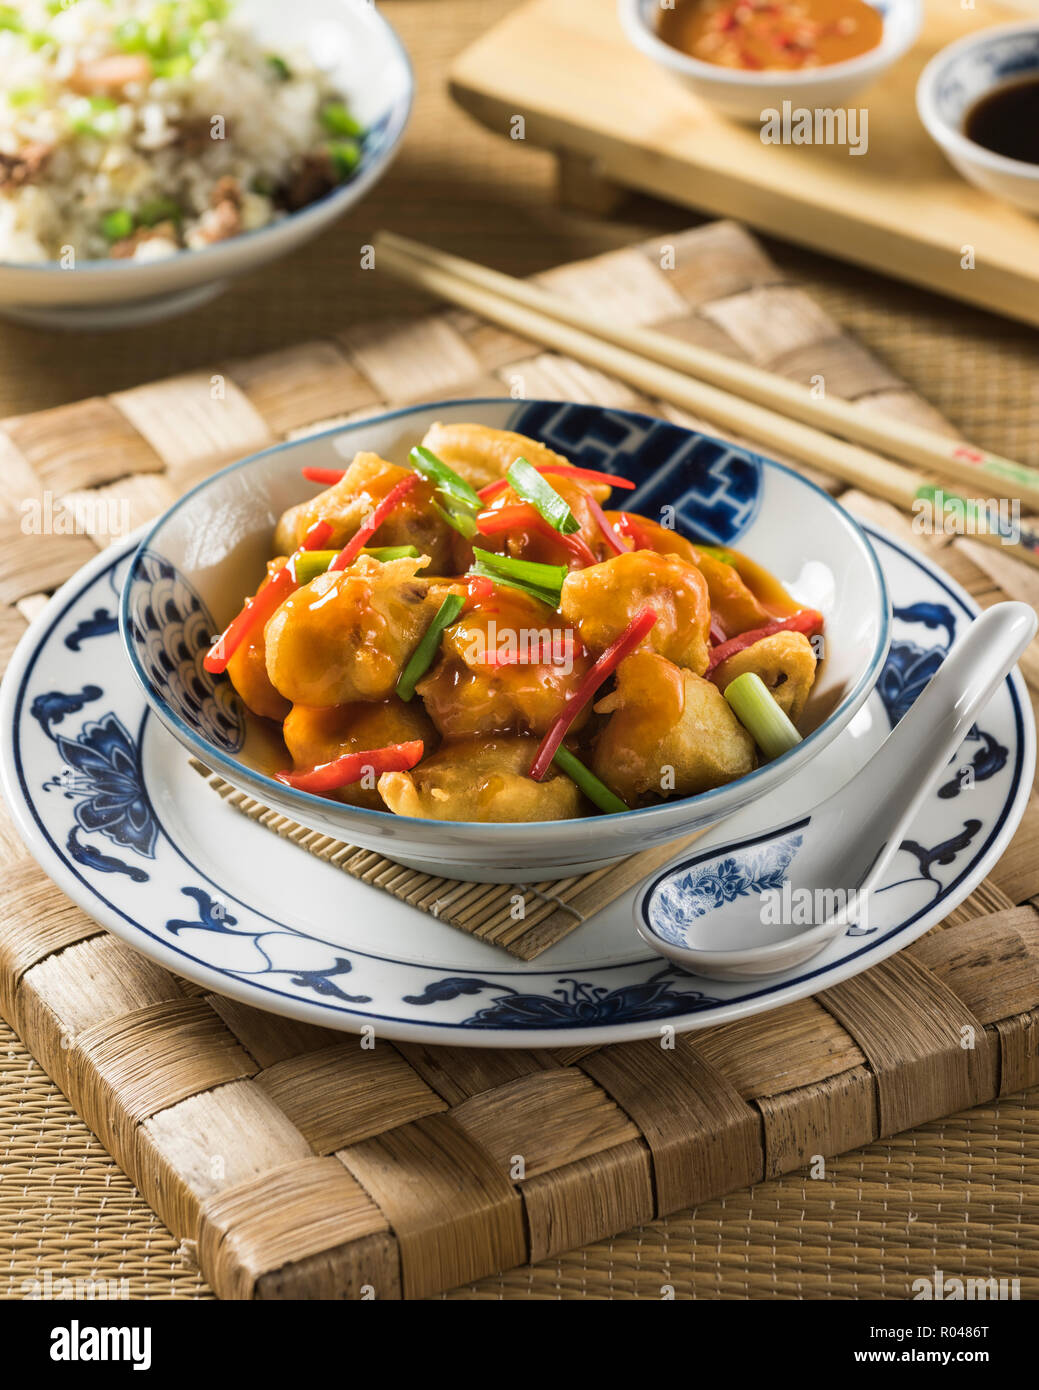 Sweet and sour pork with fried rice. Chinese food Stock Photo